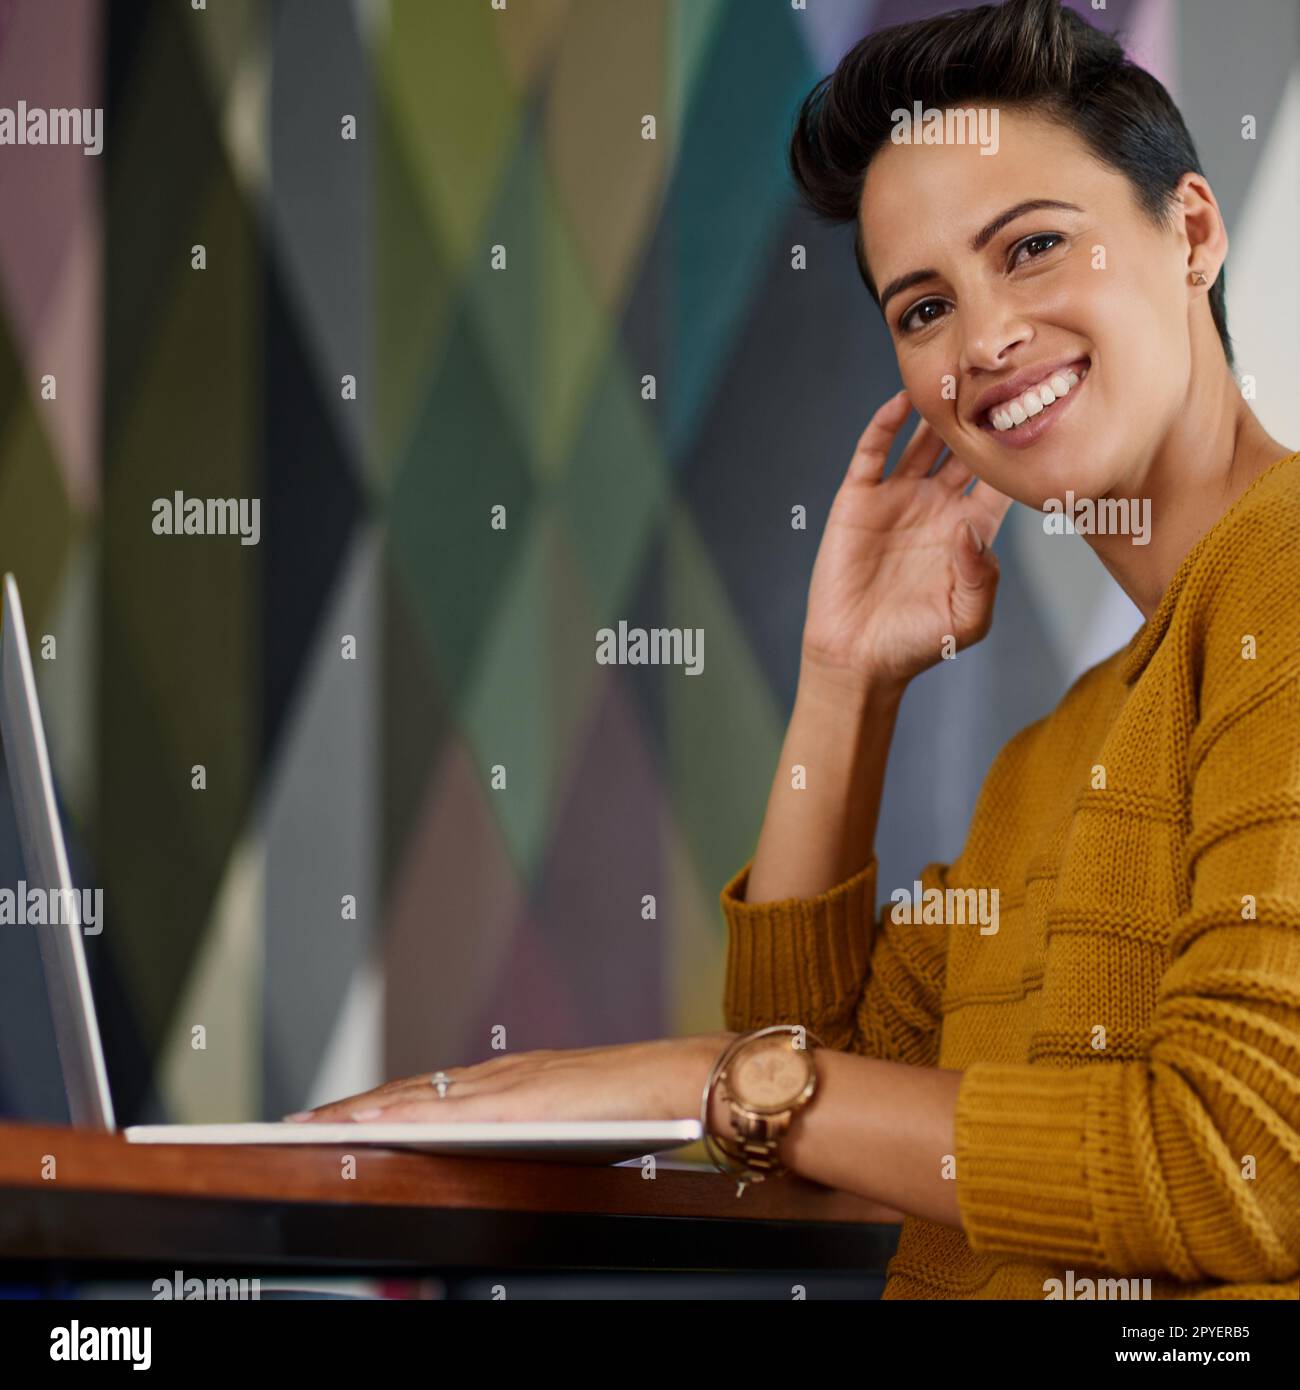 Its been an easygoing workday. Portrait of a confident young businesswoman working on a laptop in an office. Stock Photo